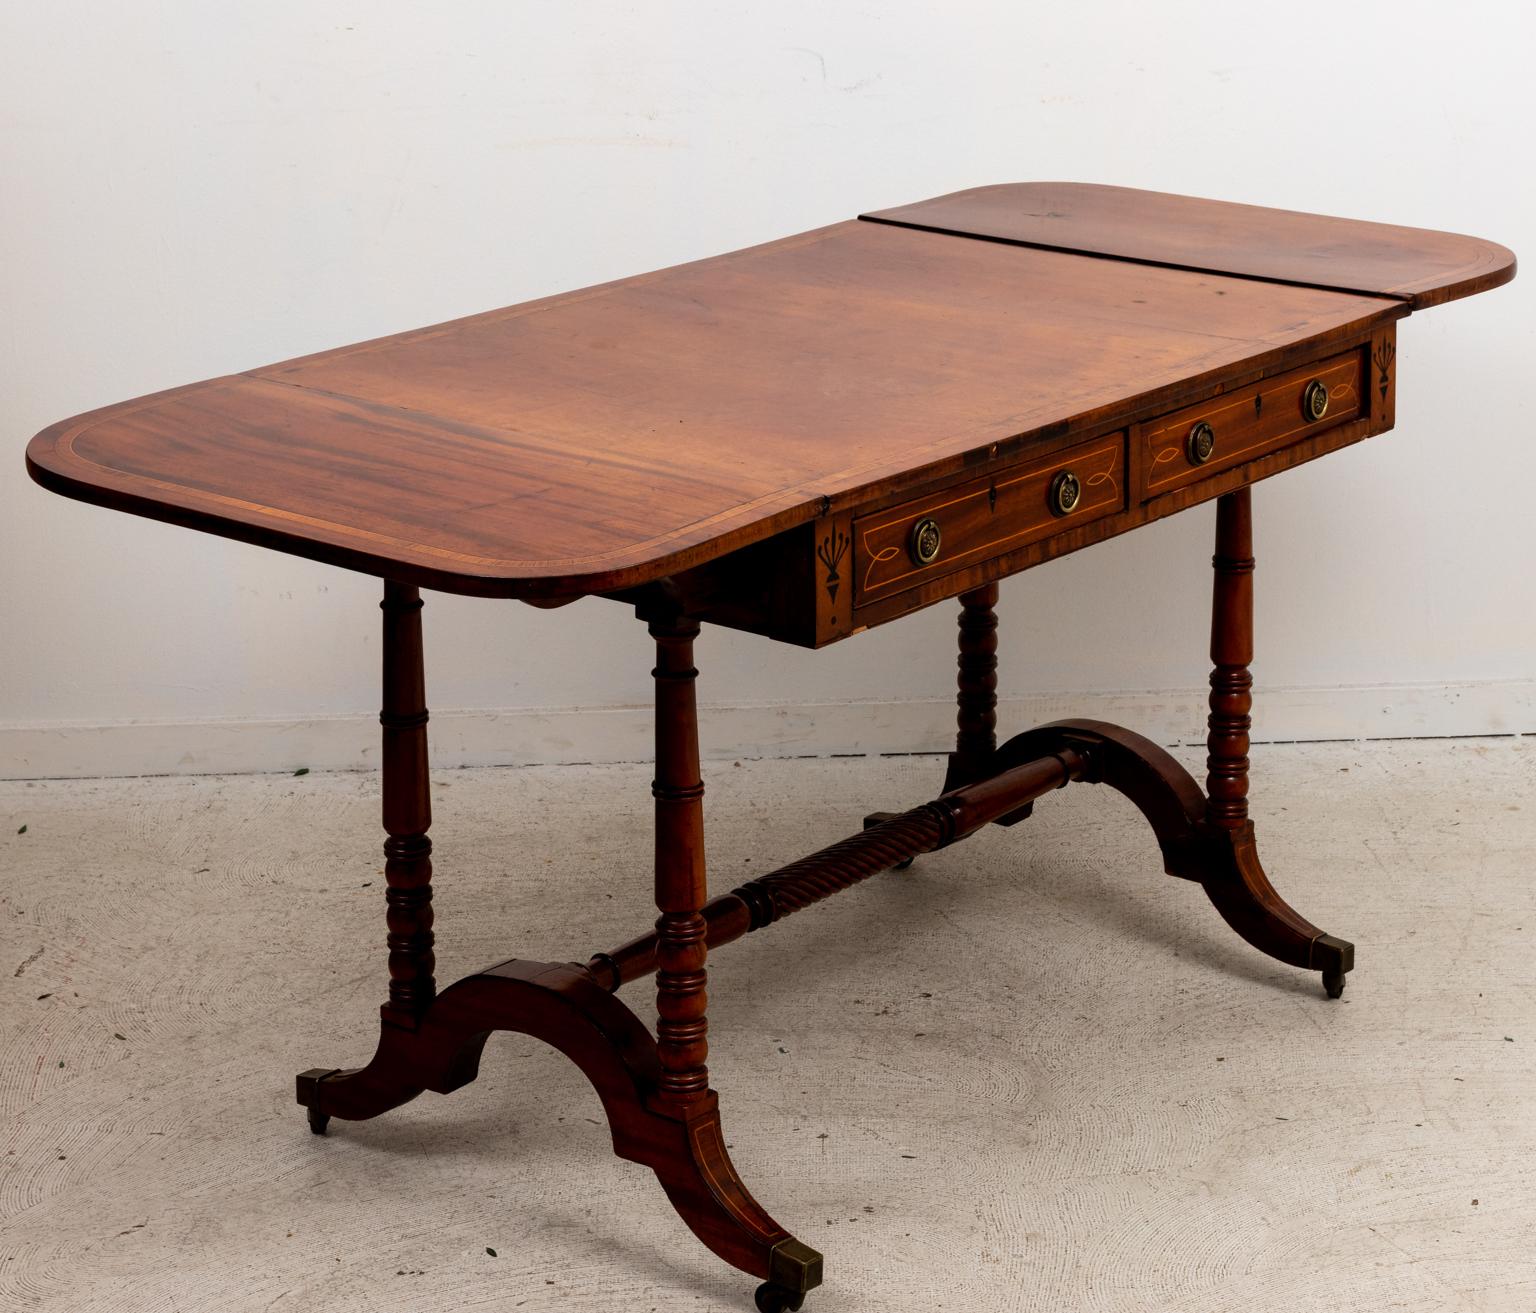 Circa late 19th century English Regency style mahogany drop leaf sofa table on trestle base with castors. The desk also features inlaid trim on the drawer fronts and tabletop, ball-and-ring turned legs, and a central barley twist shaped bottom